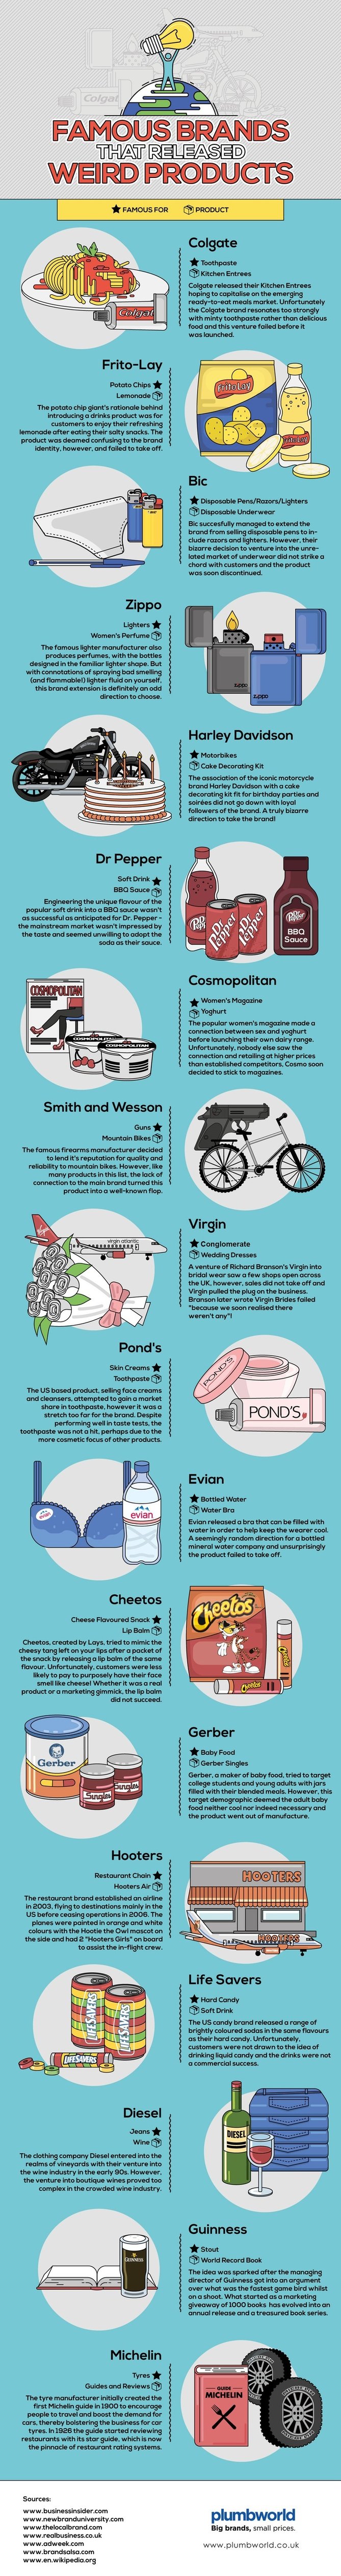 Weird_Products_Infographic.jpg